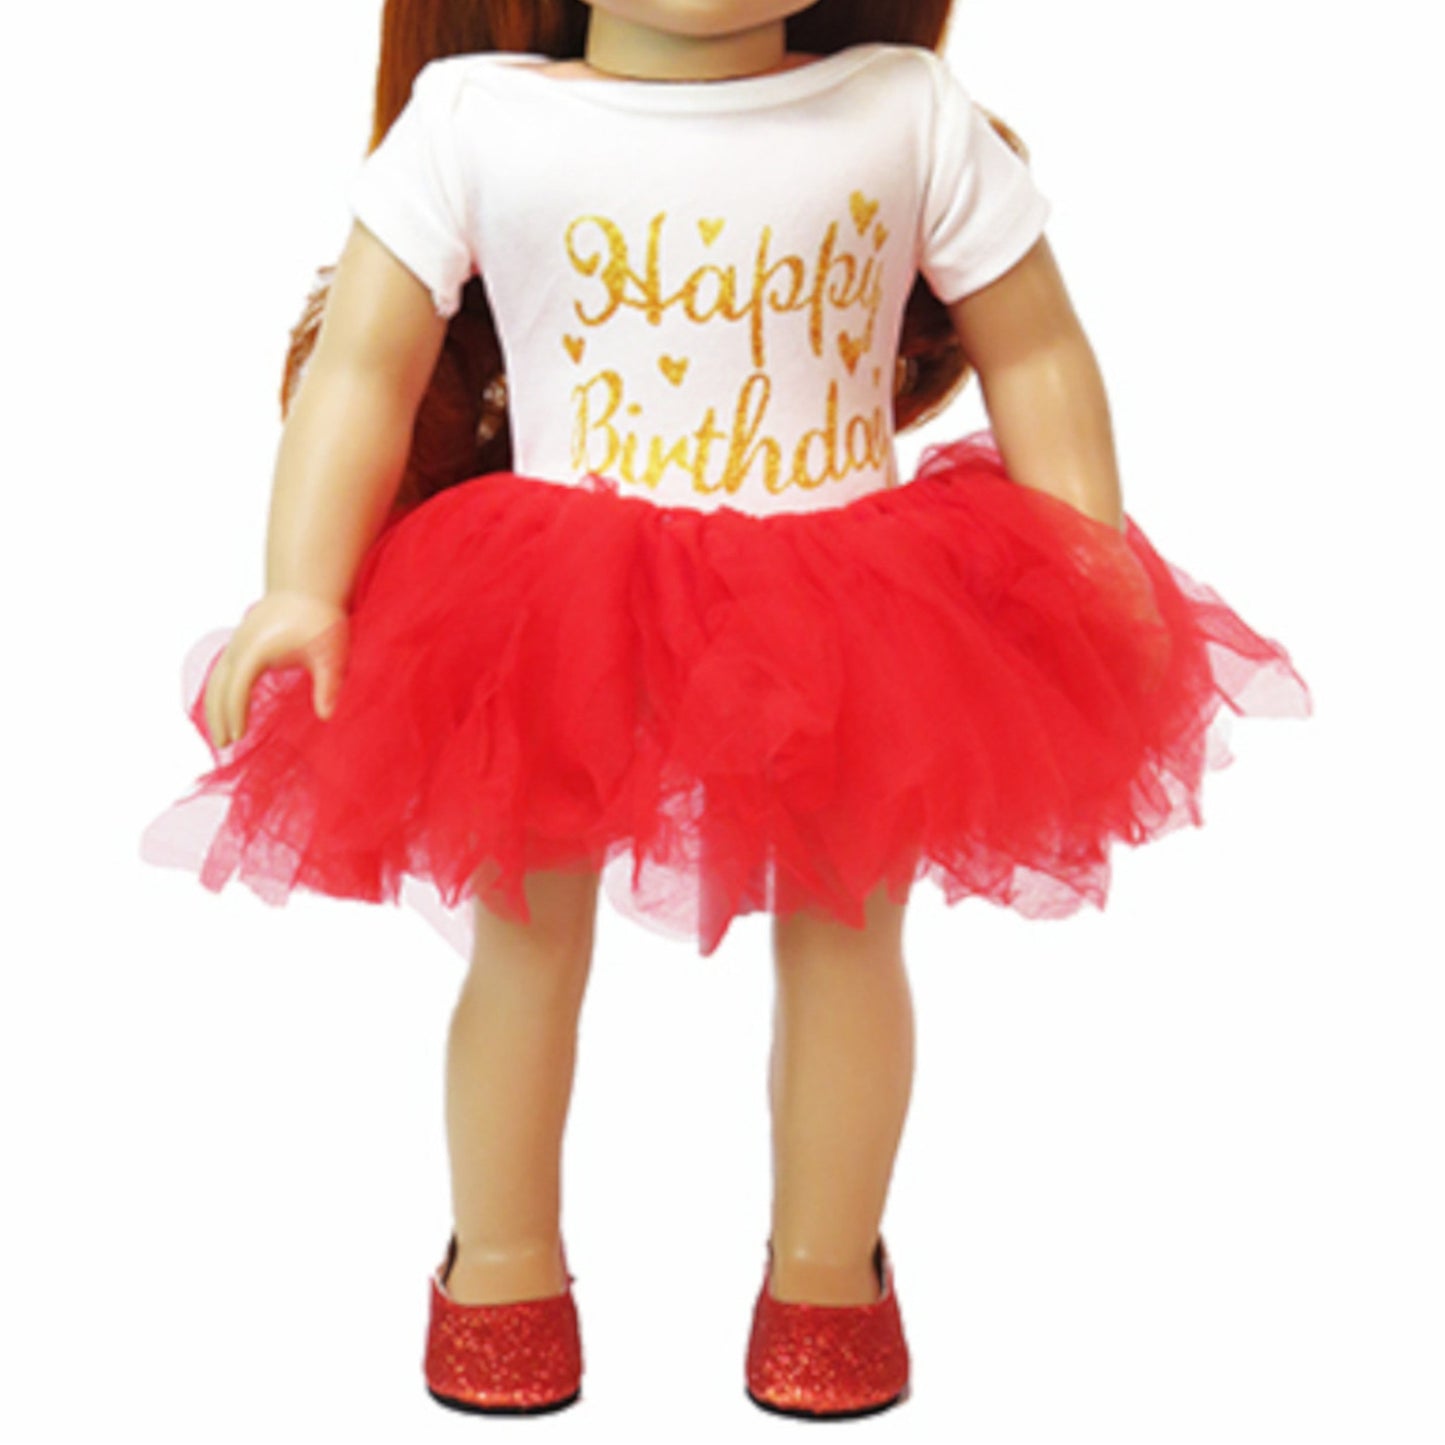 Happy Birthday Outfit for 18-inch dolls with doll